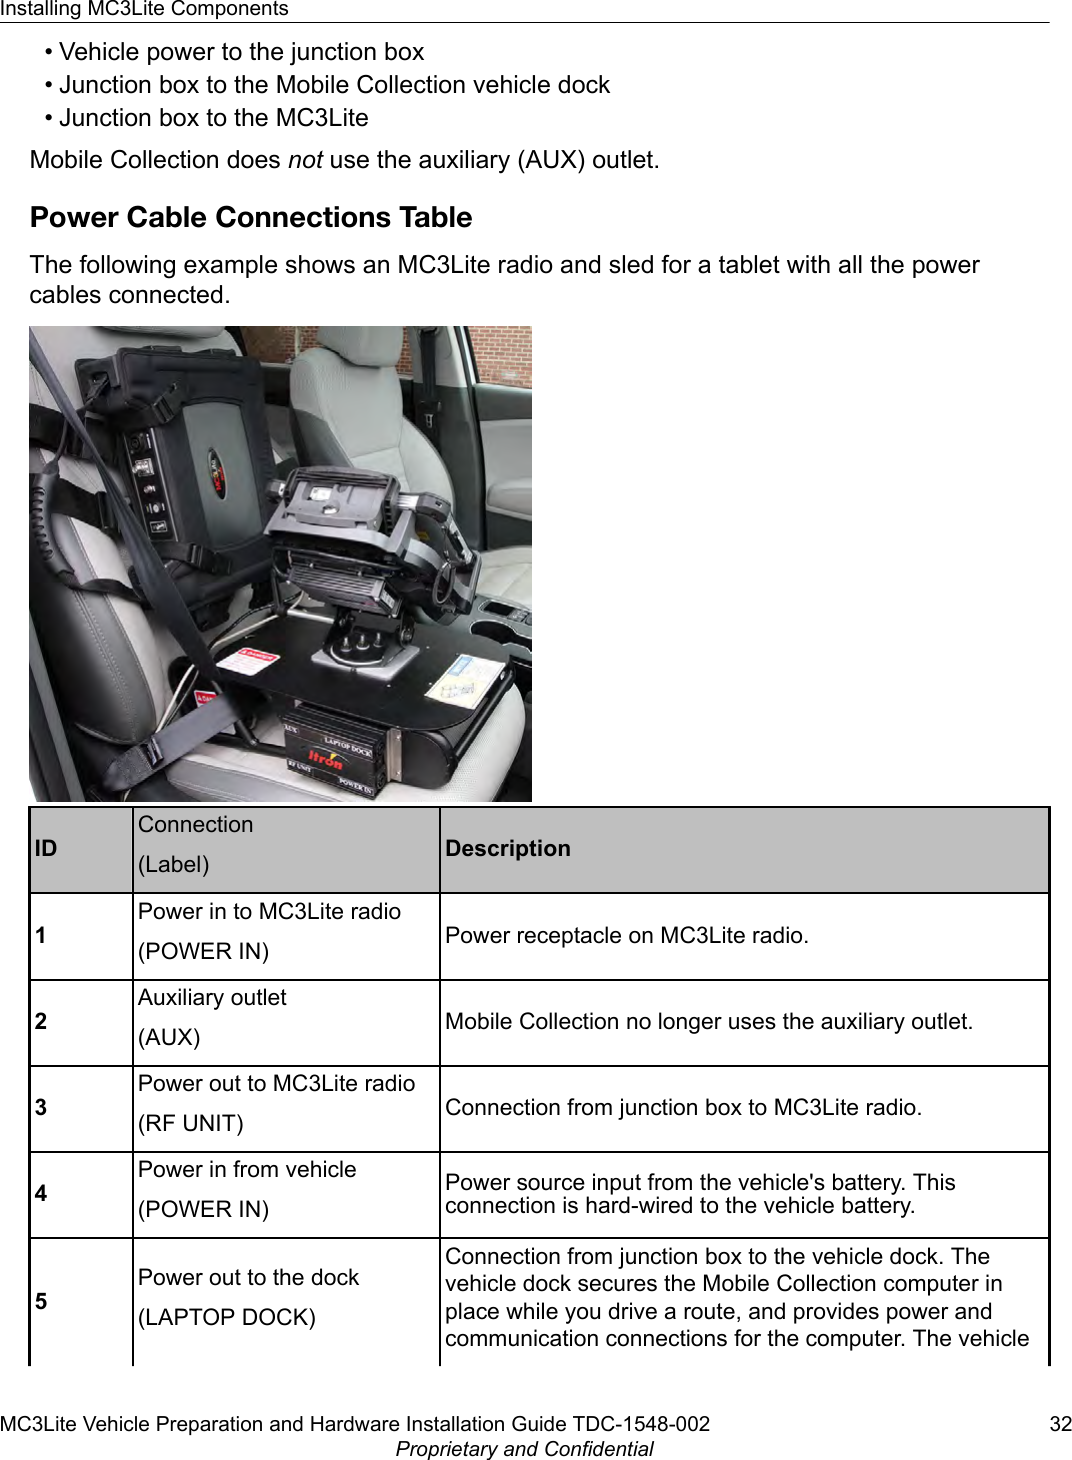 • Vehicle power to the junction box• Junction box to the Mobile Collection vehicle dock• Junction box to the MC3LiteMobile Collection does not use the auxiliary (AUX) outlet.Power Cable Connections TableThe following example shows an MC3Lite radio and sled for a tablet with all the powercables connected.IDConnection(Label) Description1Power in to MC3Lite radio(POWER IN) Power receptacle on MC3Lite radio.2Auxiliary outlet(AUX) Mobile Collection no longer uses the auxiliary outlet.3Power out to MC3Lite radio(RF UNIT) Connection from junction box to MC3Lite radio.4Power in from vehicle(POWER IN)Power source input from the vehicle&apos;s battery. Thisconnection is hard-wired to the vehicle battery.5Power out to the dock(LAPTOP DOCK)Connection from junction box to the vehicle dock. Thevehicle dock secures the Mobile Collection computer inplace while you drive a route, and provides power andcommunication connections for the computer. The vehicleInstalling MC3Lite ComponentsMC3Lite Vehicle Preparation and Hardware Installation Guide TDC-1548-002 32Proprietary and Confidential